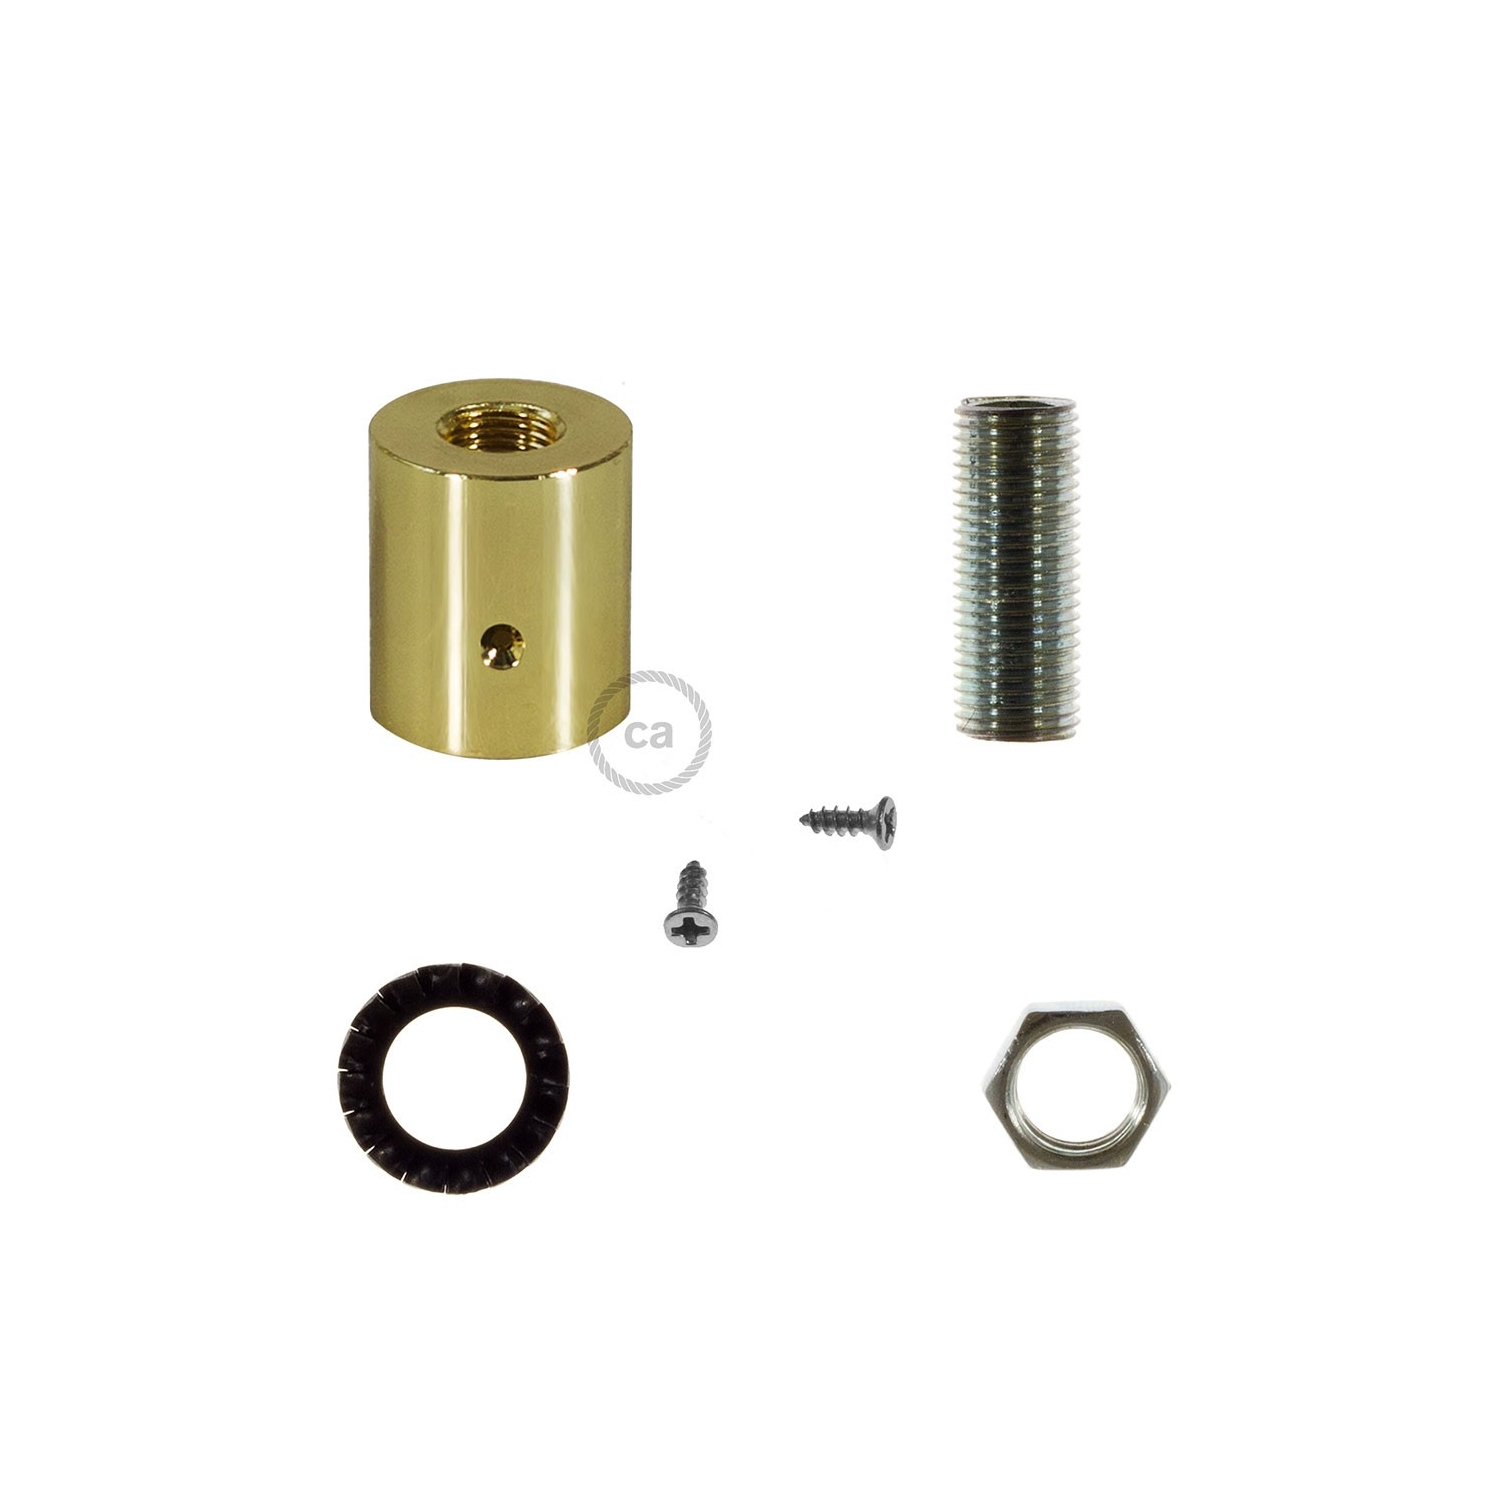 Brass metal cable terminal for 16 mm Creative-Tube, accessories included